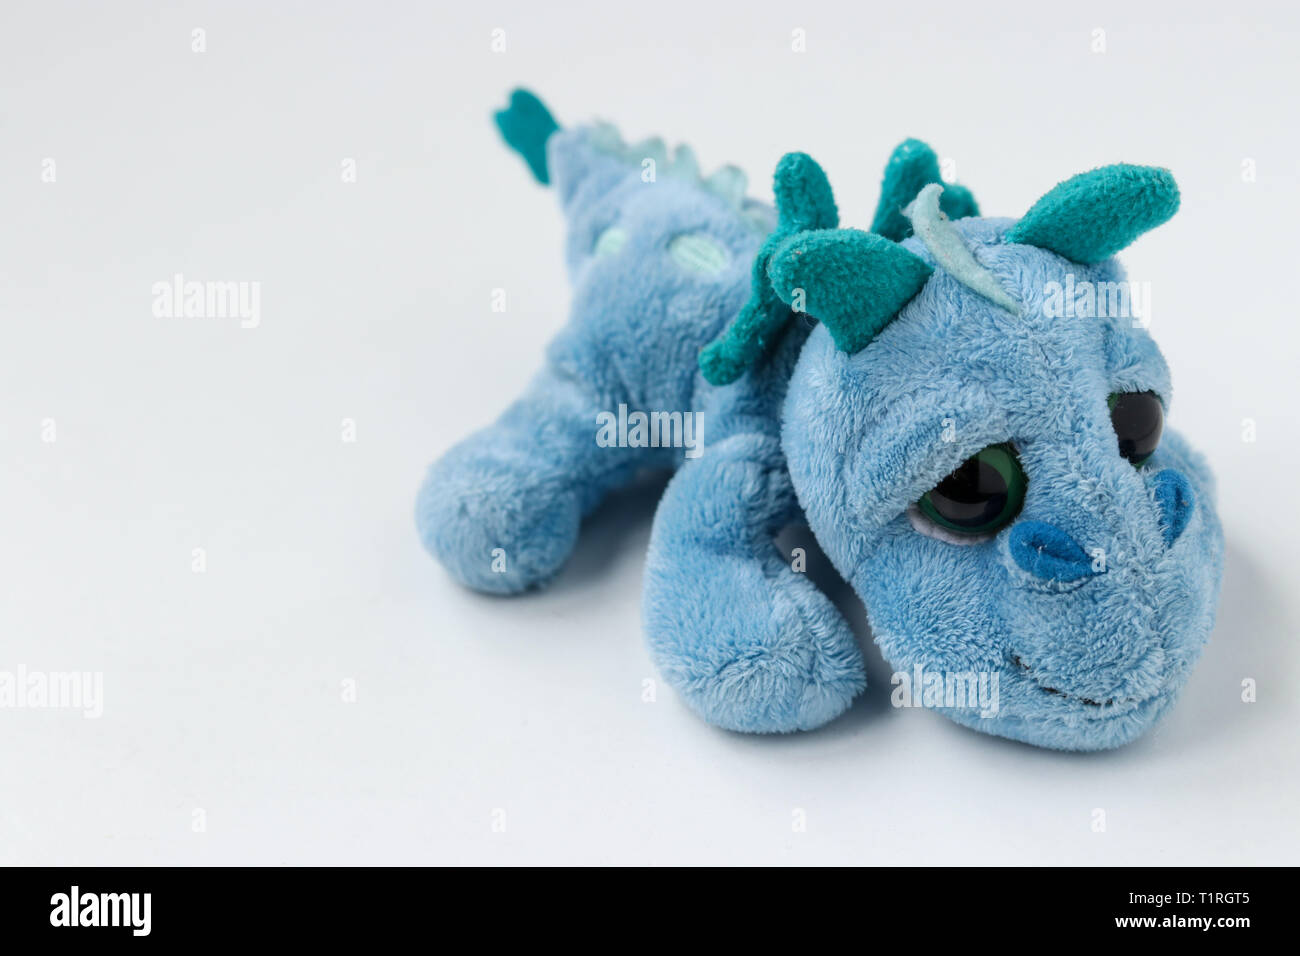 Children's soft toy blue dragon is located on a white background Stock Photo